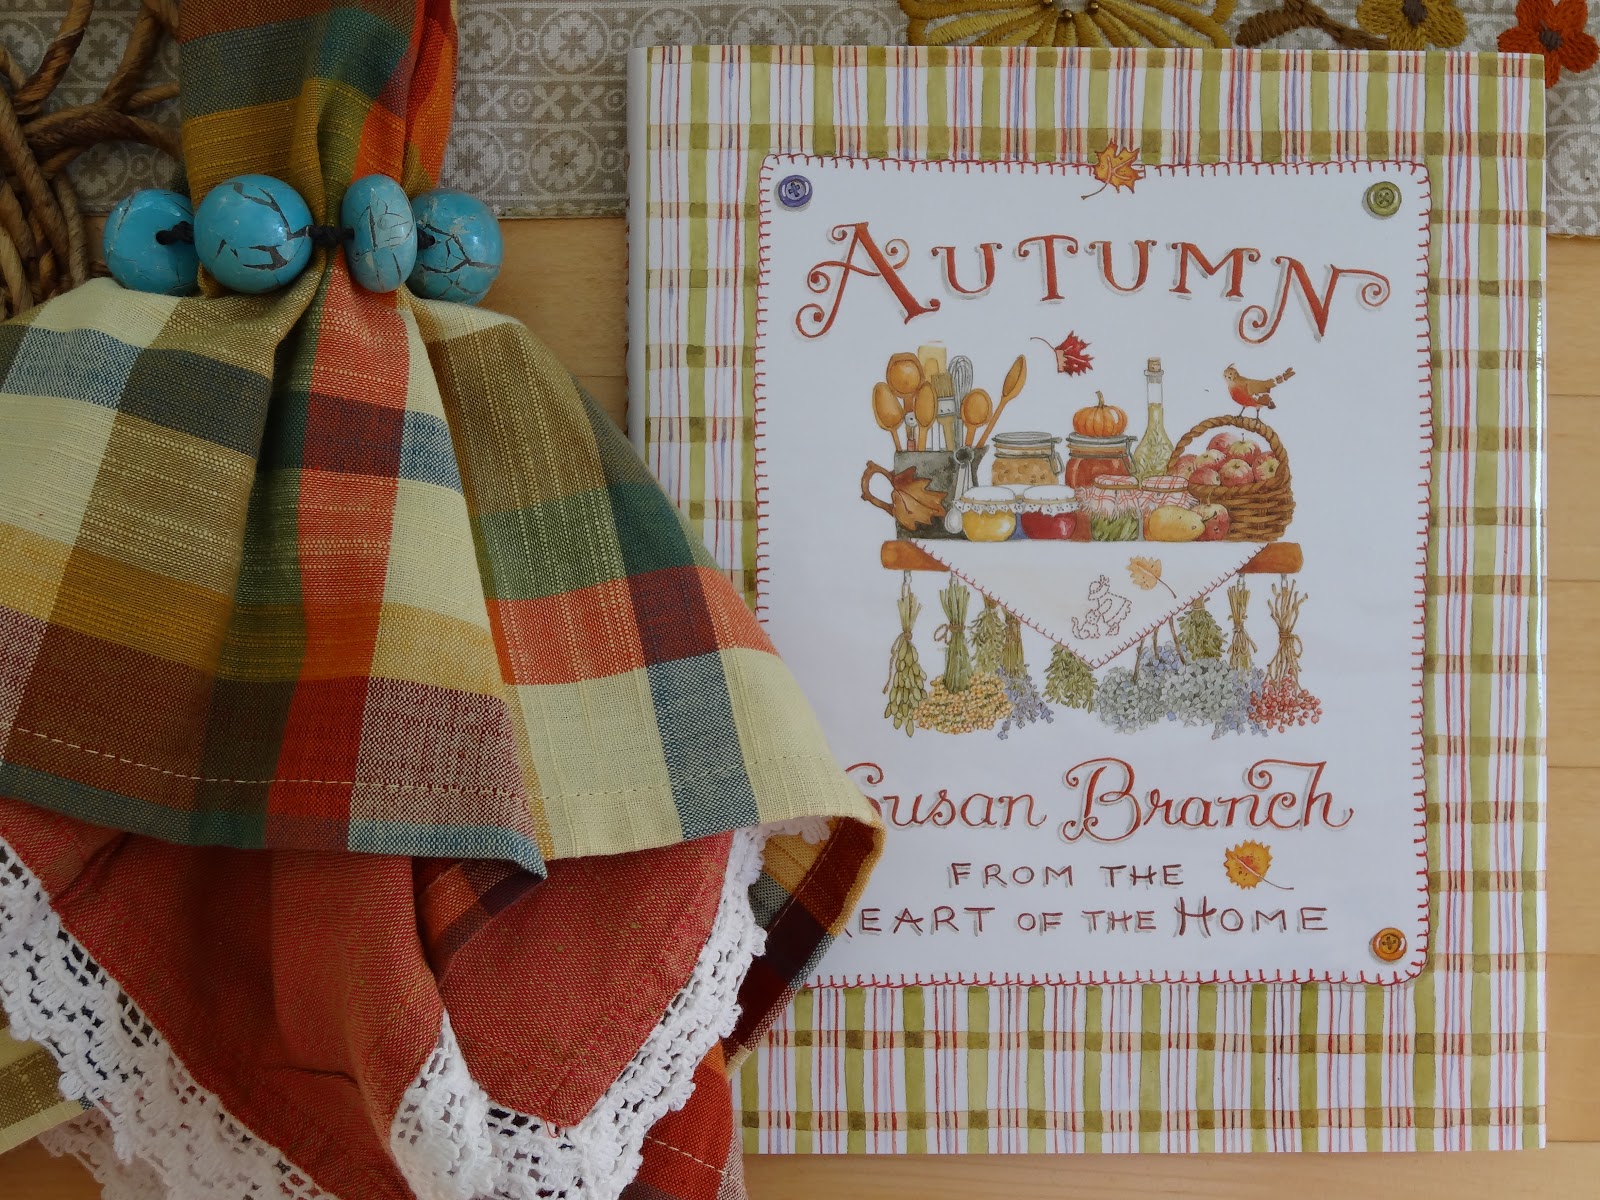 Autumn: From the Heart of the Home